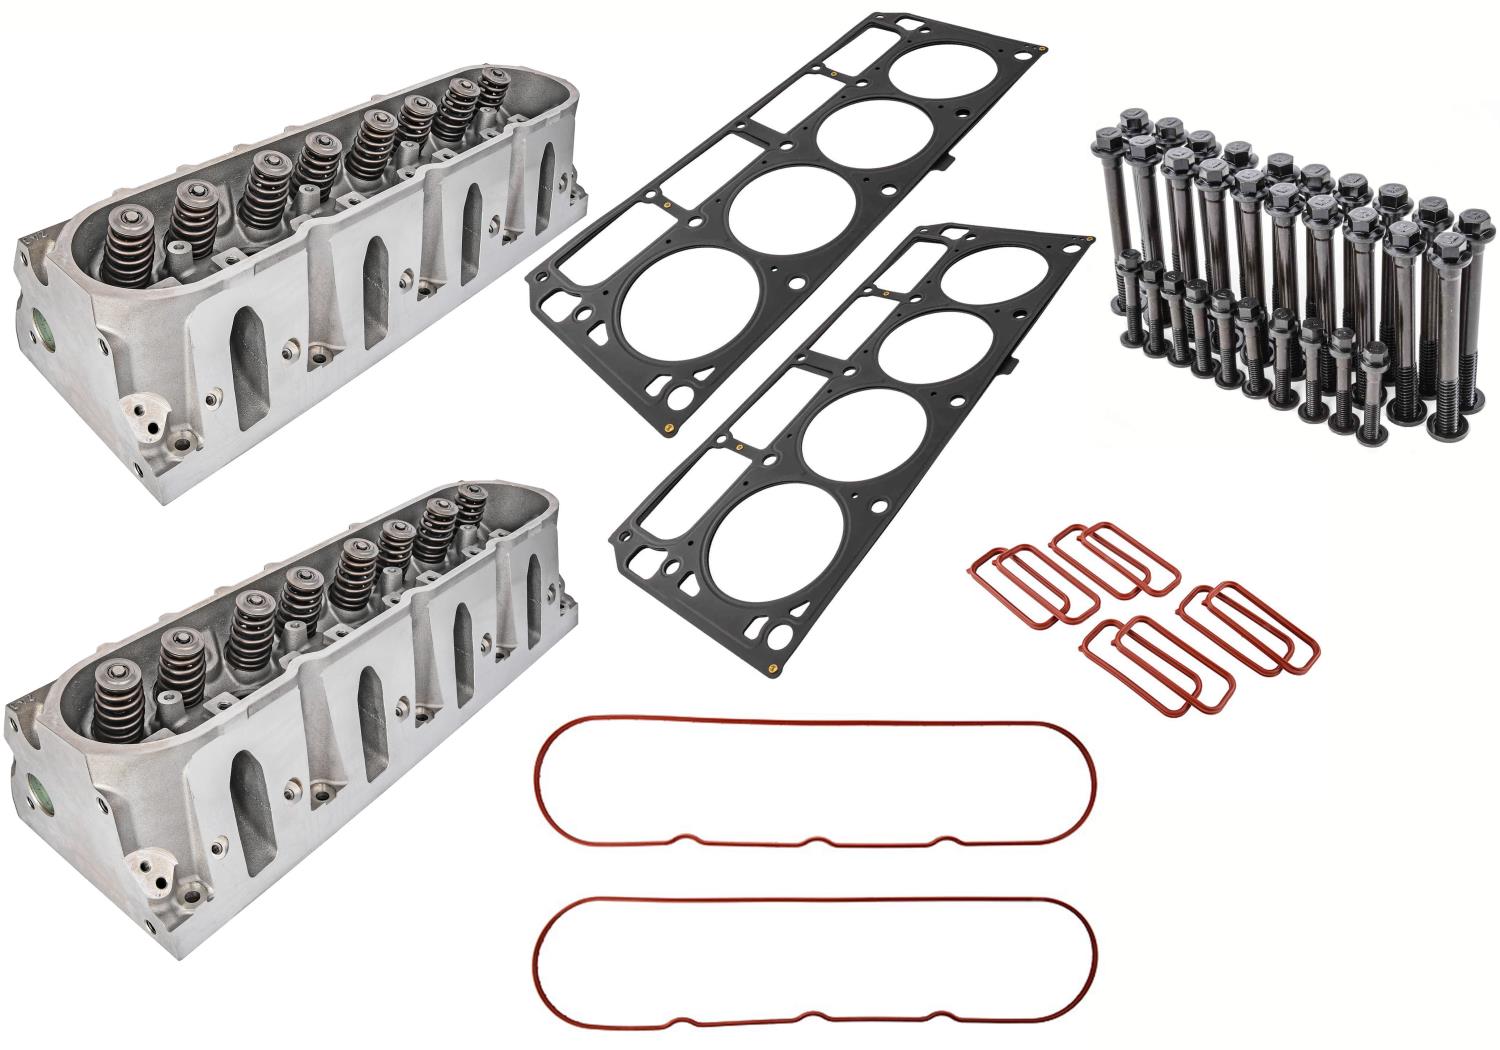 Cylinder Head Kit for GM LS1, LS2 & LS6 Engines [Cathedral Port]